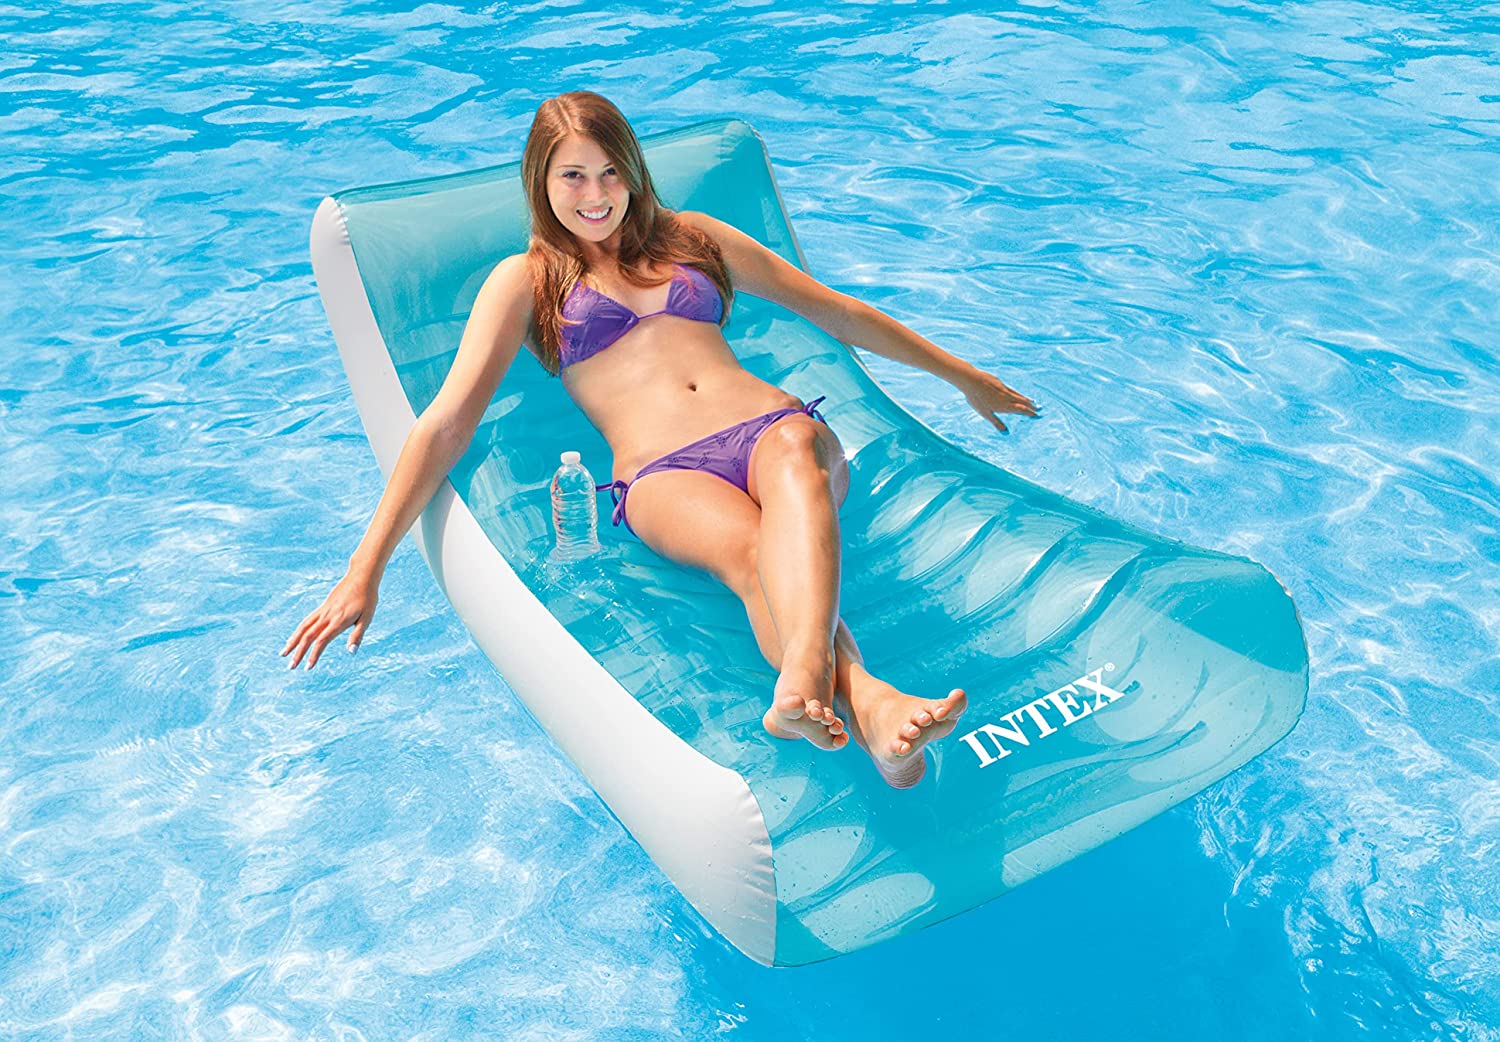 Prime Day Deals on Pool Floats